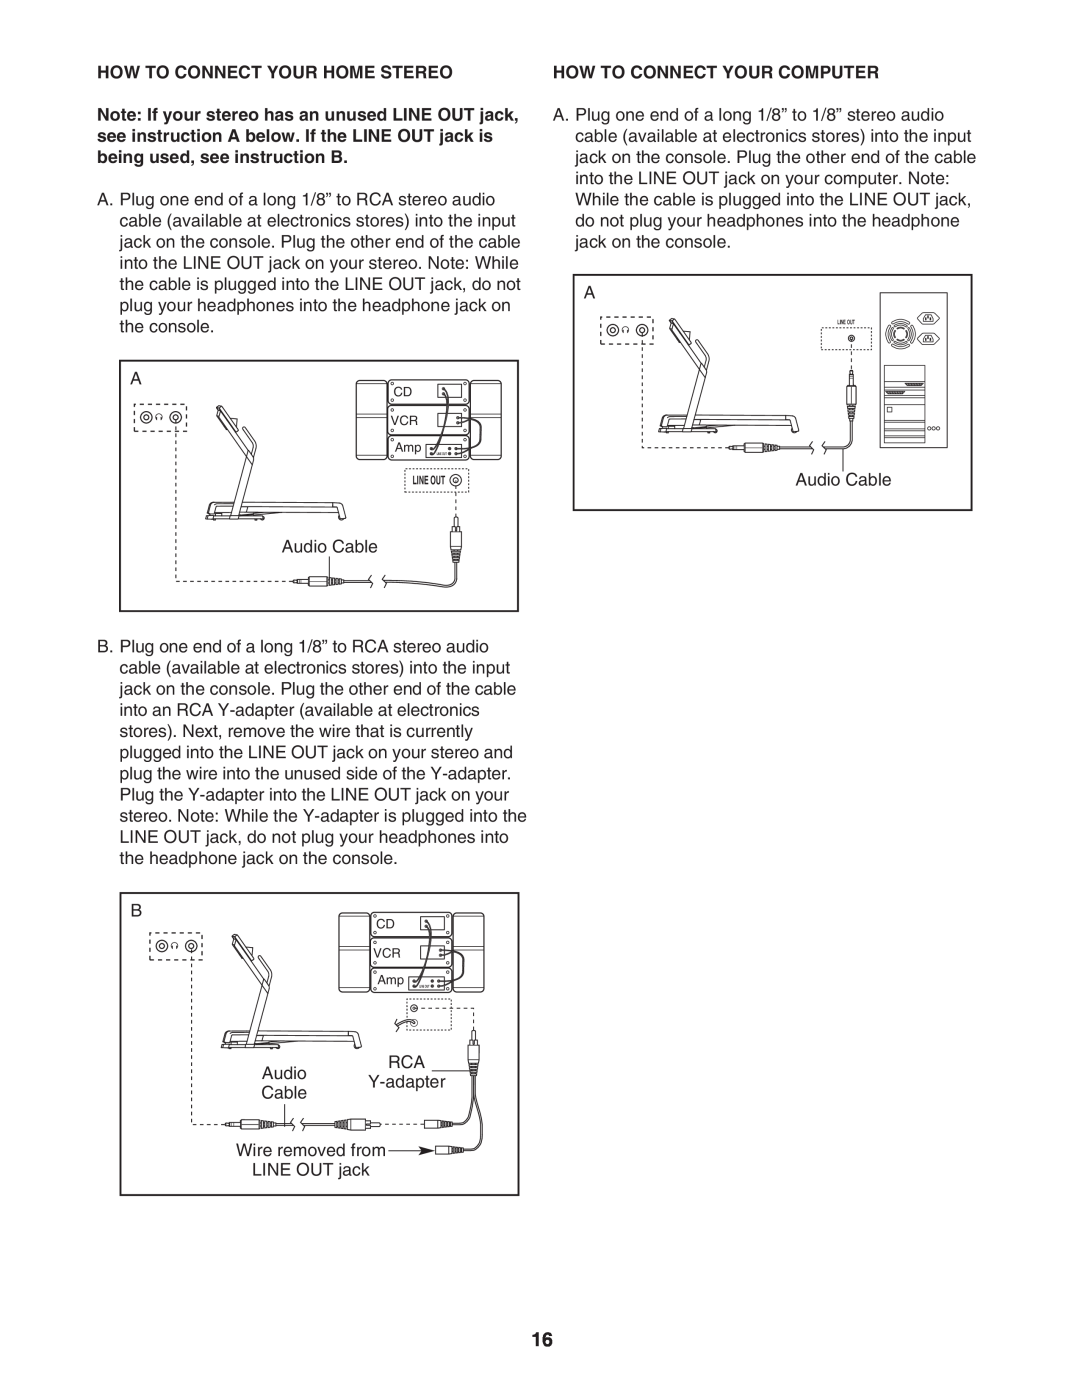 ProForm 831.29605.0 user manual How To Connect Your Home Stereo, How To Connect Your Computer, Line Out 